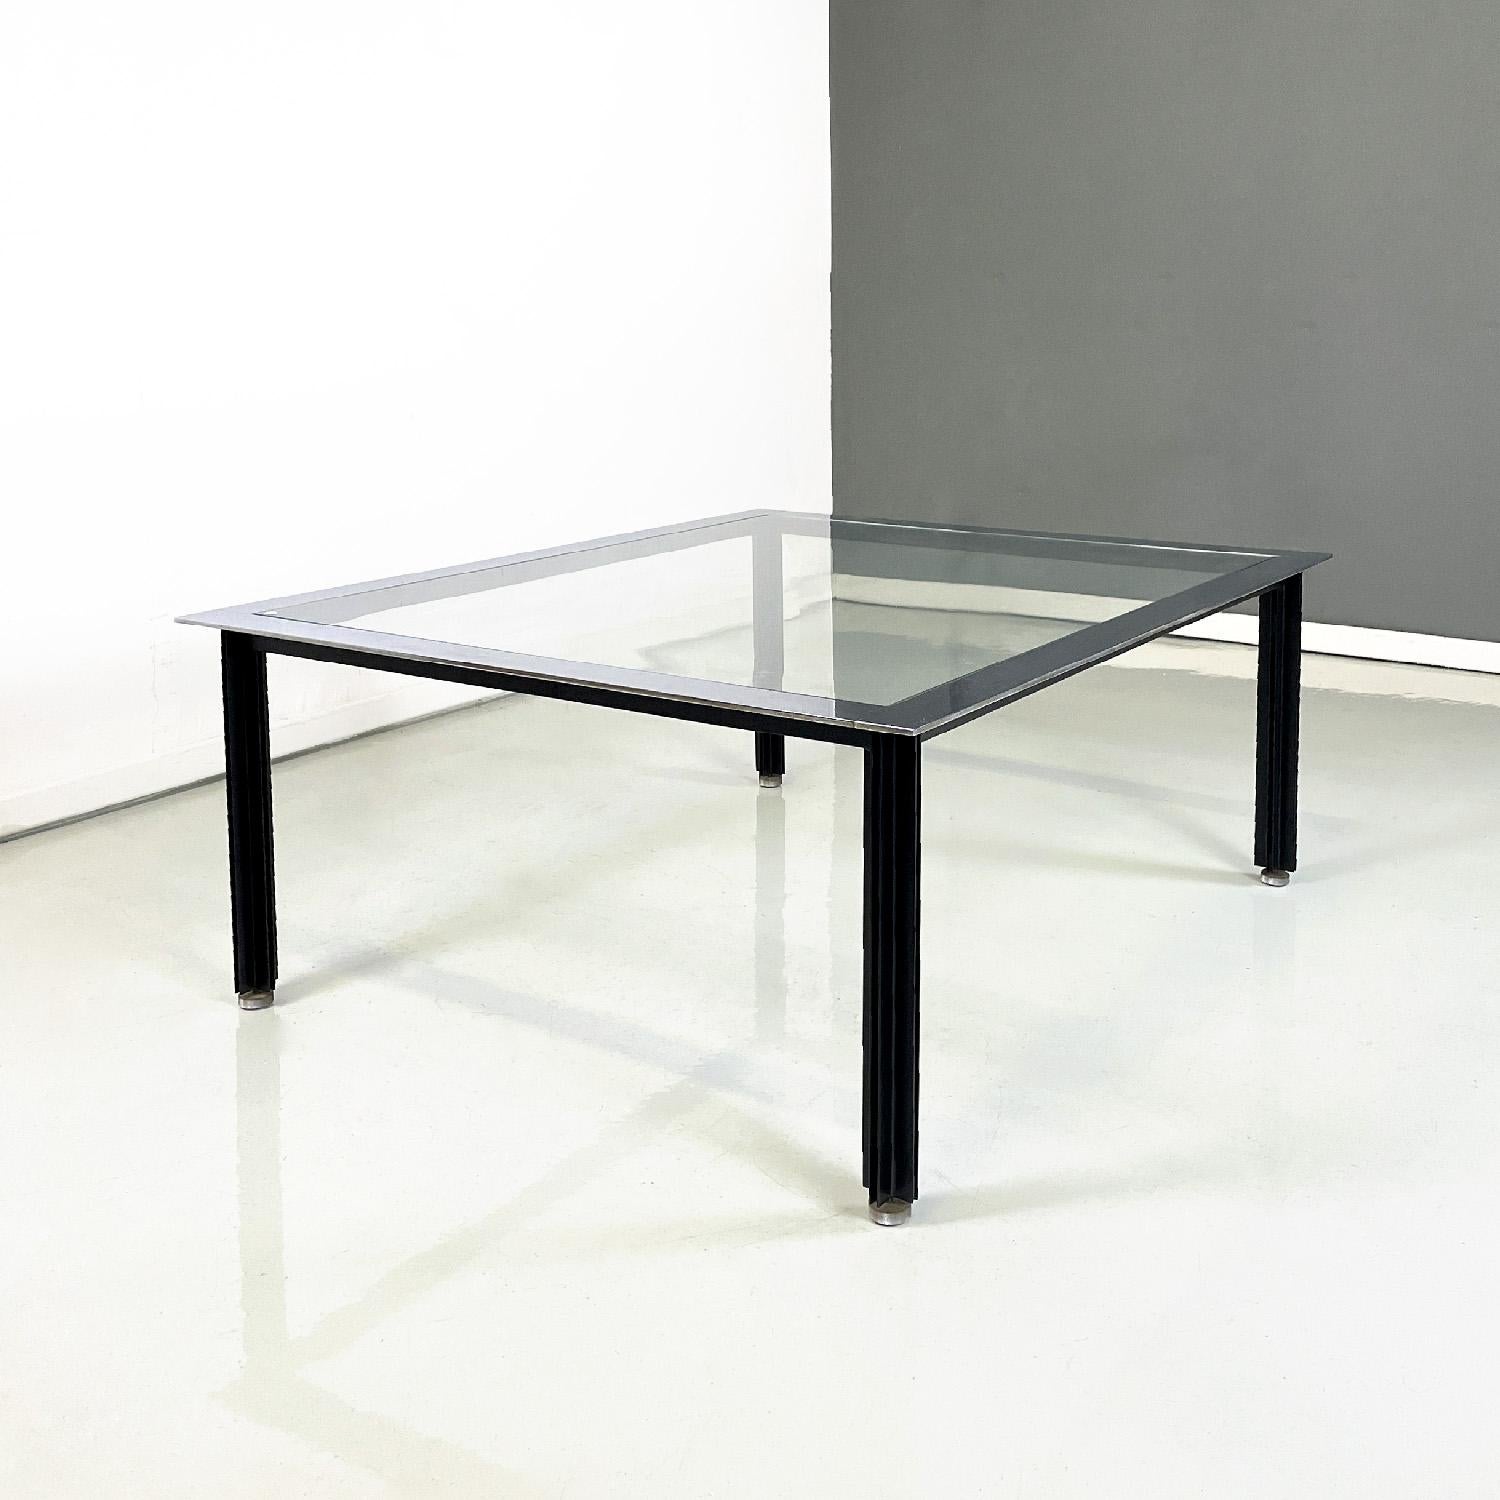 Italian mid-century modern coffee table by Luigi Caccia Dominioni for Azucena, 1960
Coffee table with chromed steel structure, black metal leg and transparent glass top.
Designed by Luigi Caccia Dominioni for Azucena in the 1960s and belonging to